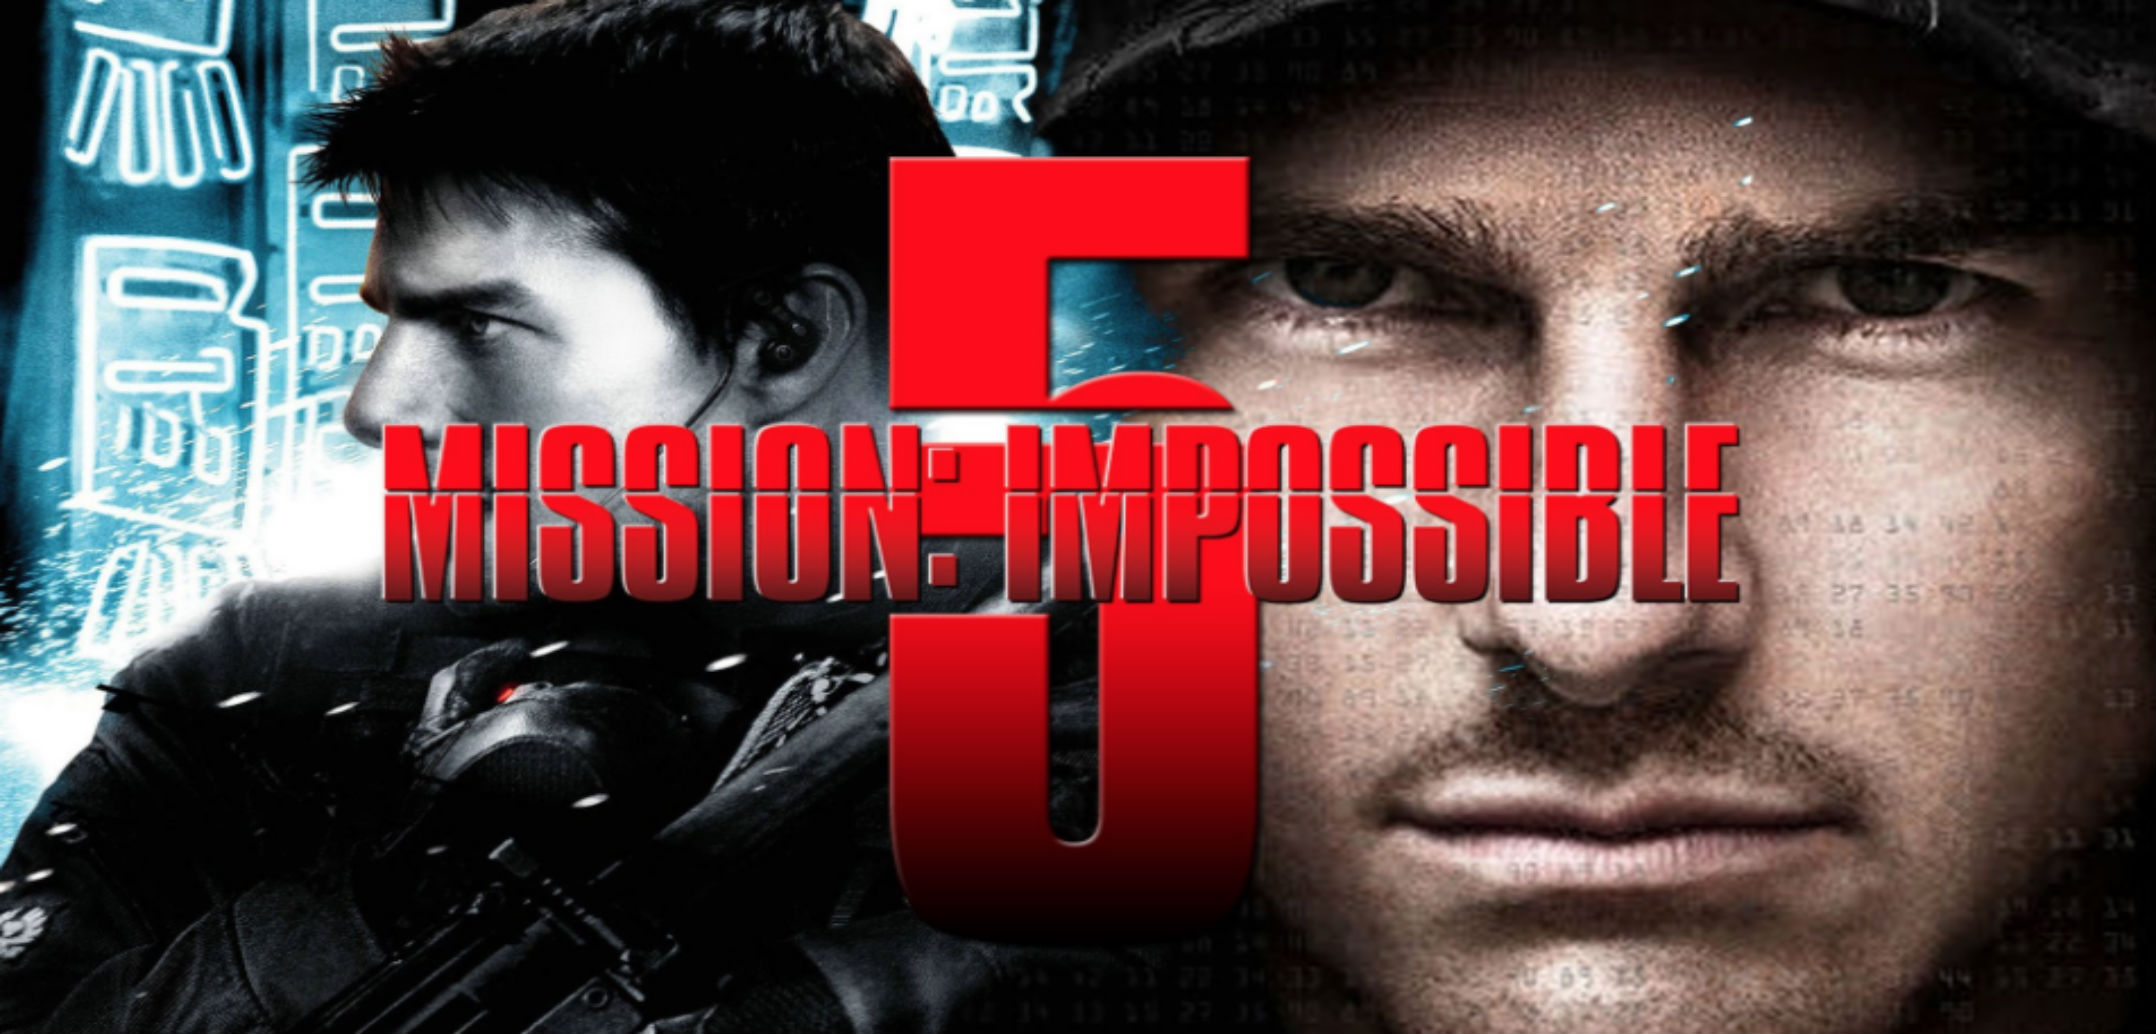 trailer mission impossible 5